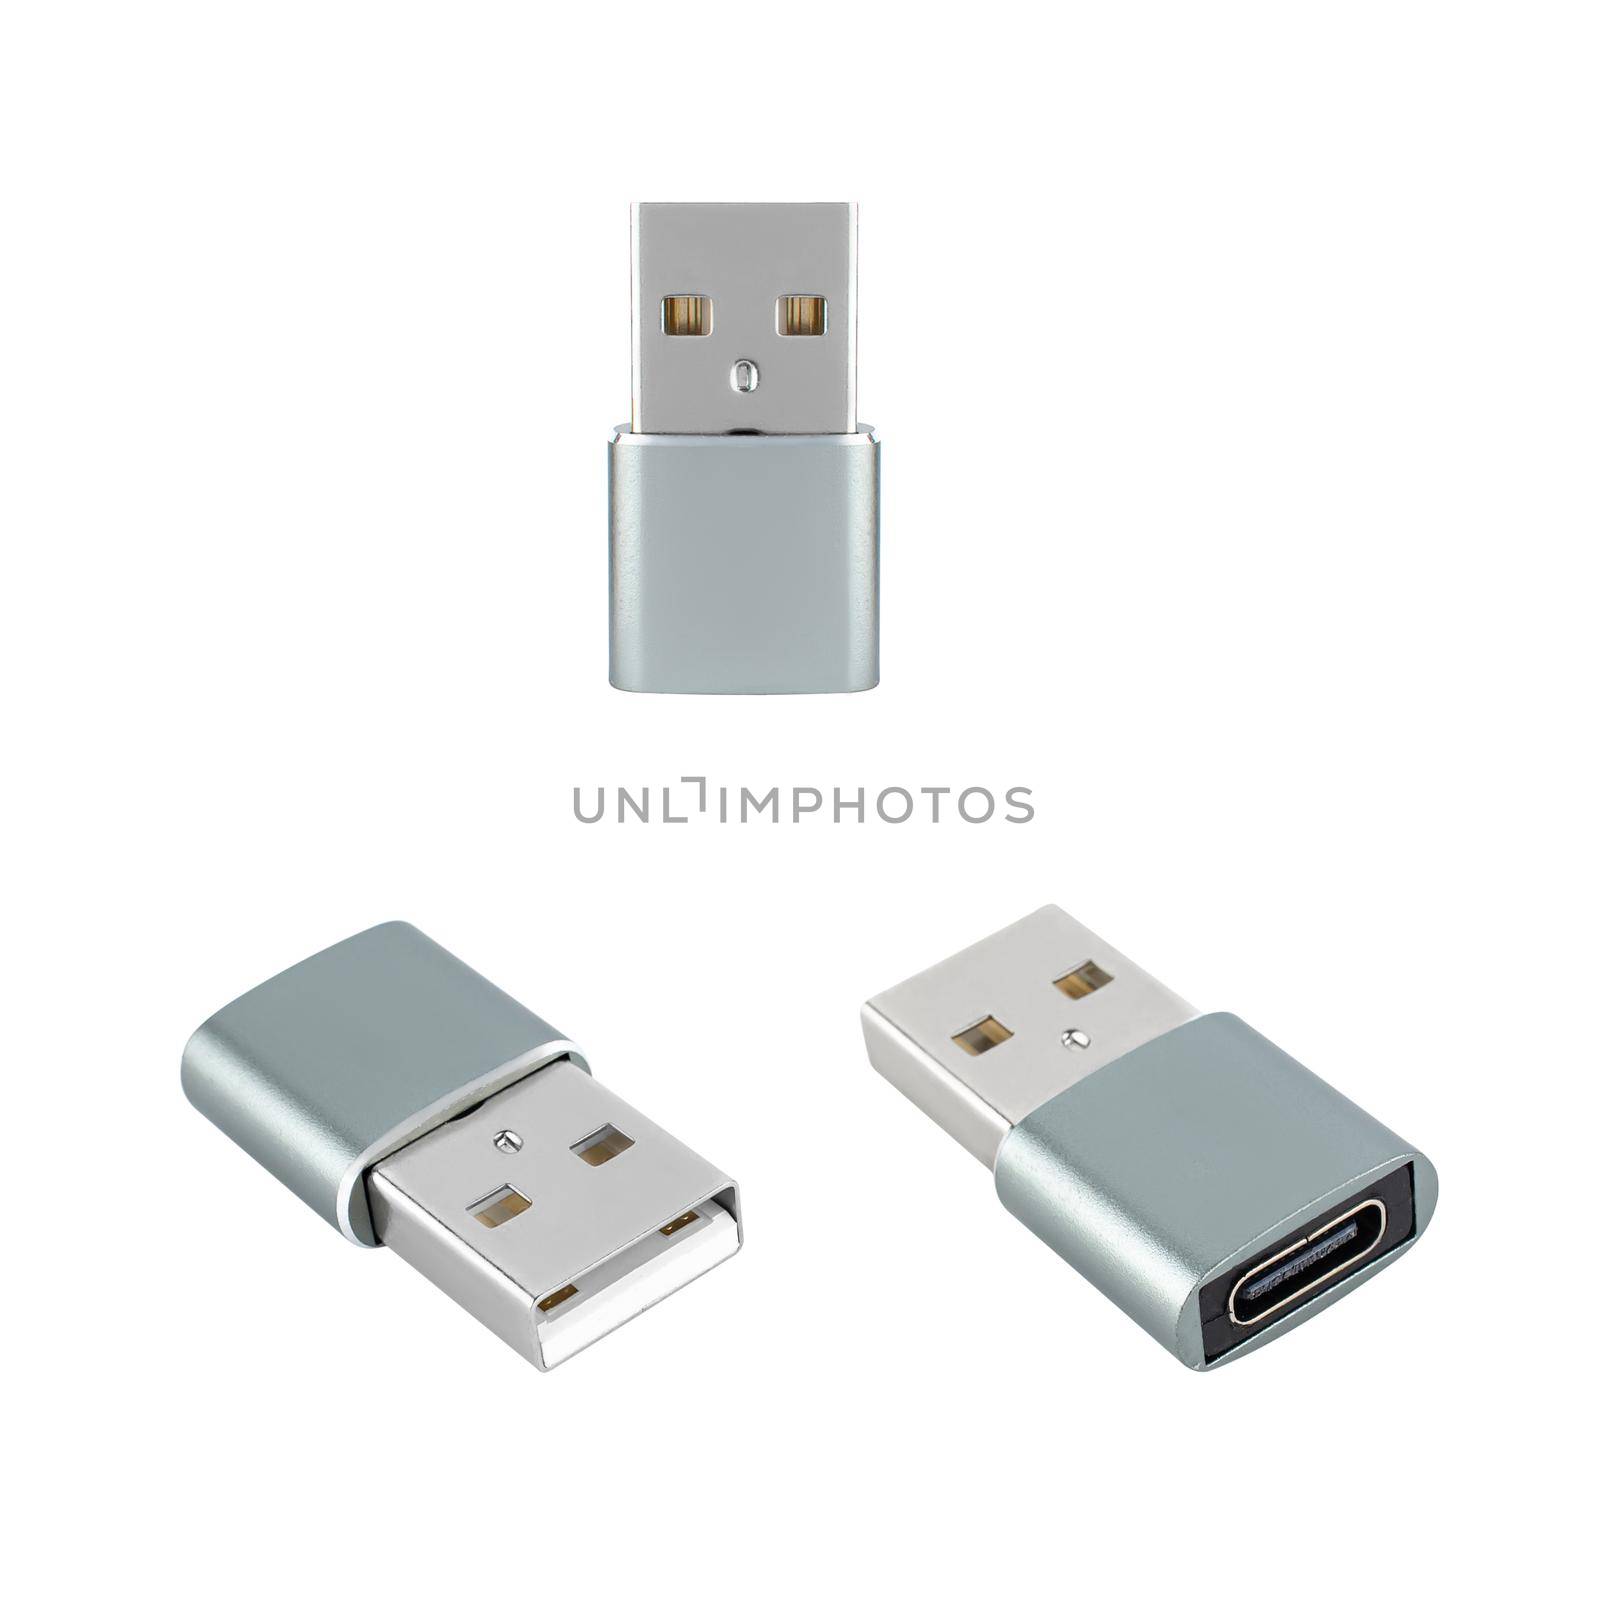 USB Type-C adapter, in three projections, on a white background by A_A